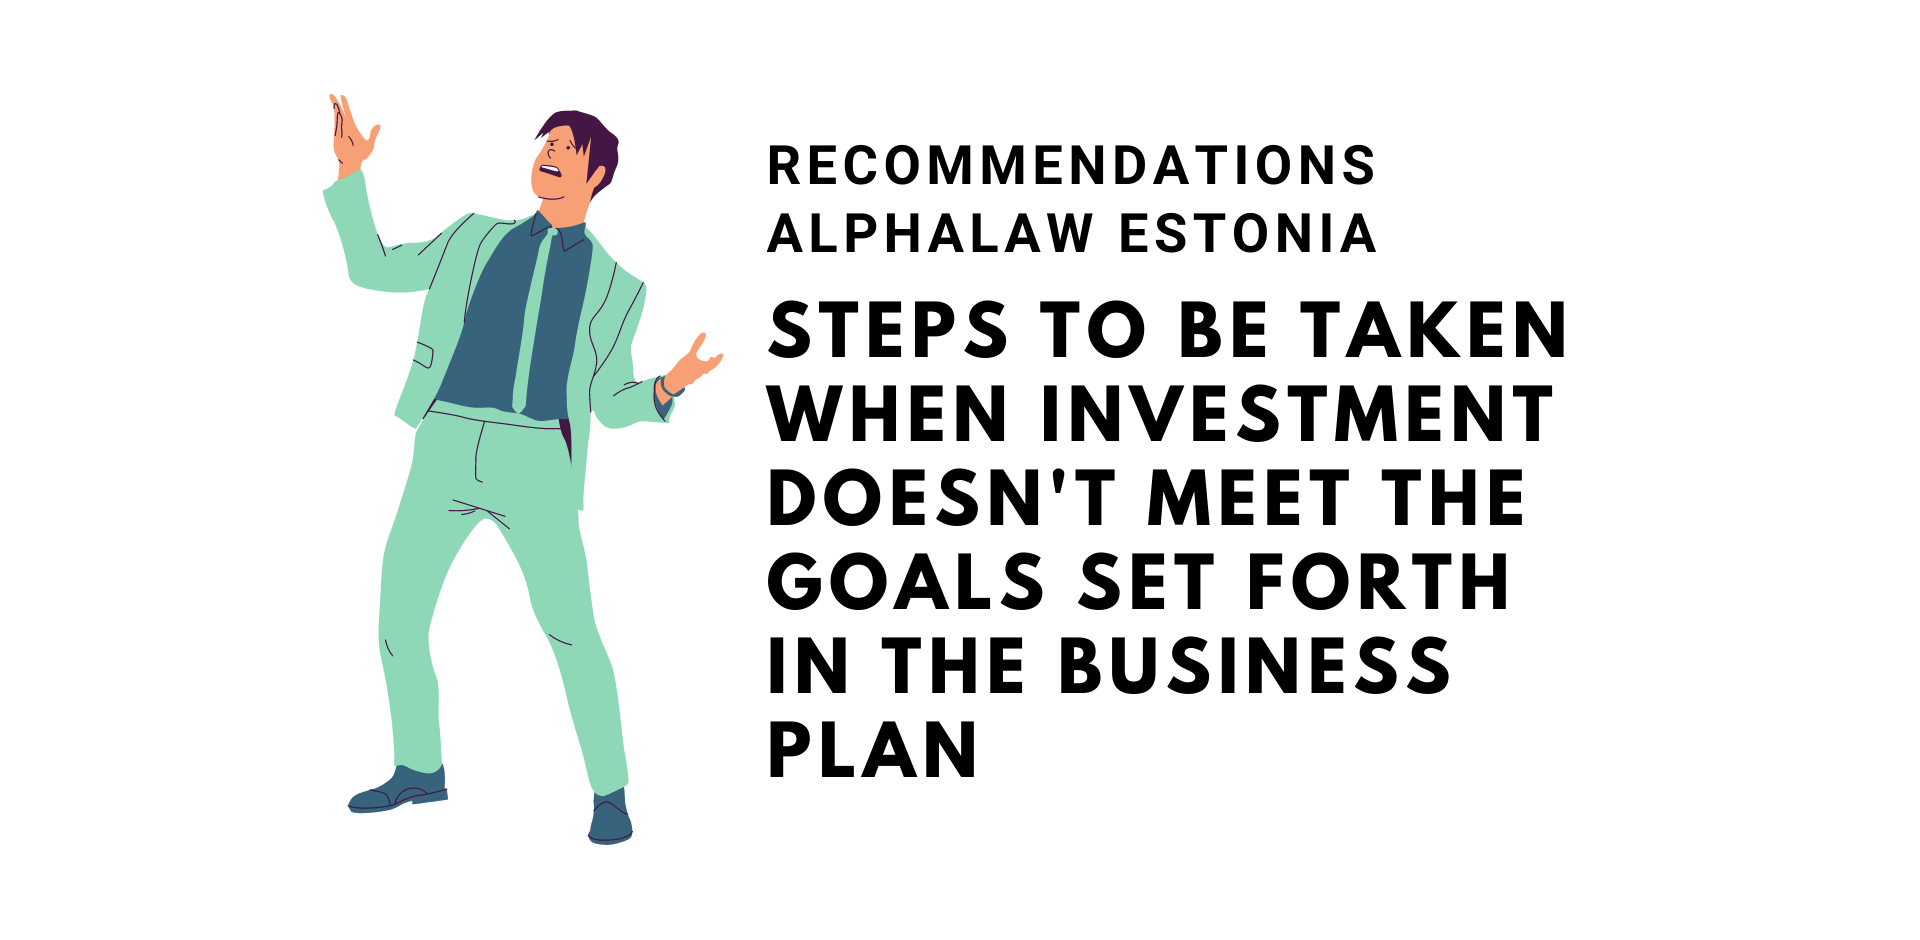 Steps To Be Taken When Investment Doesn't Meet the Goals Set Forth in the Business Plan